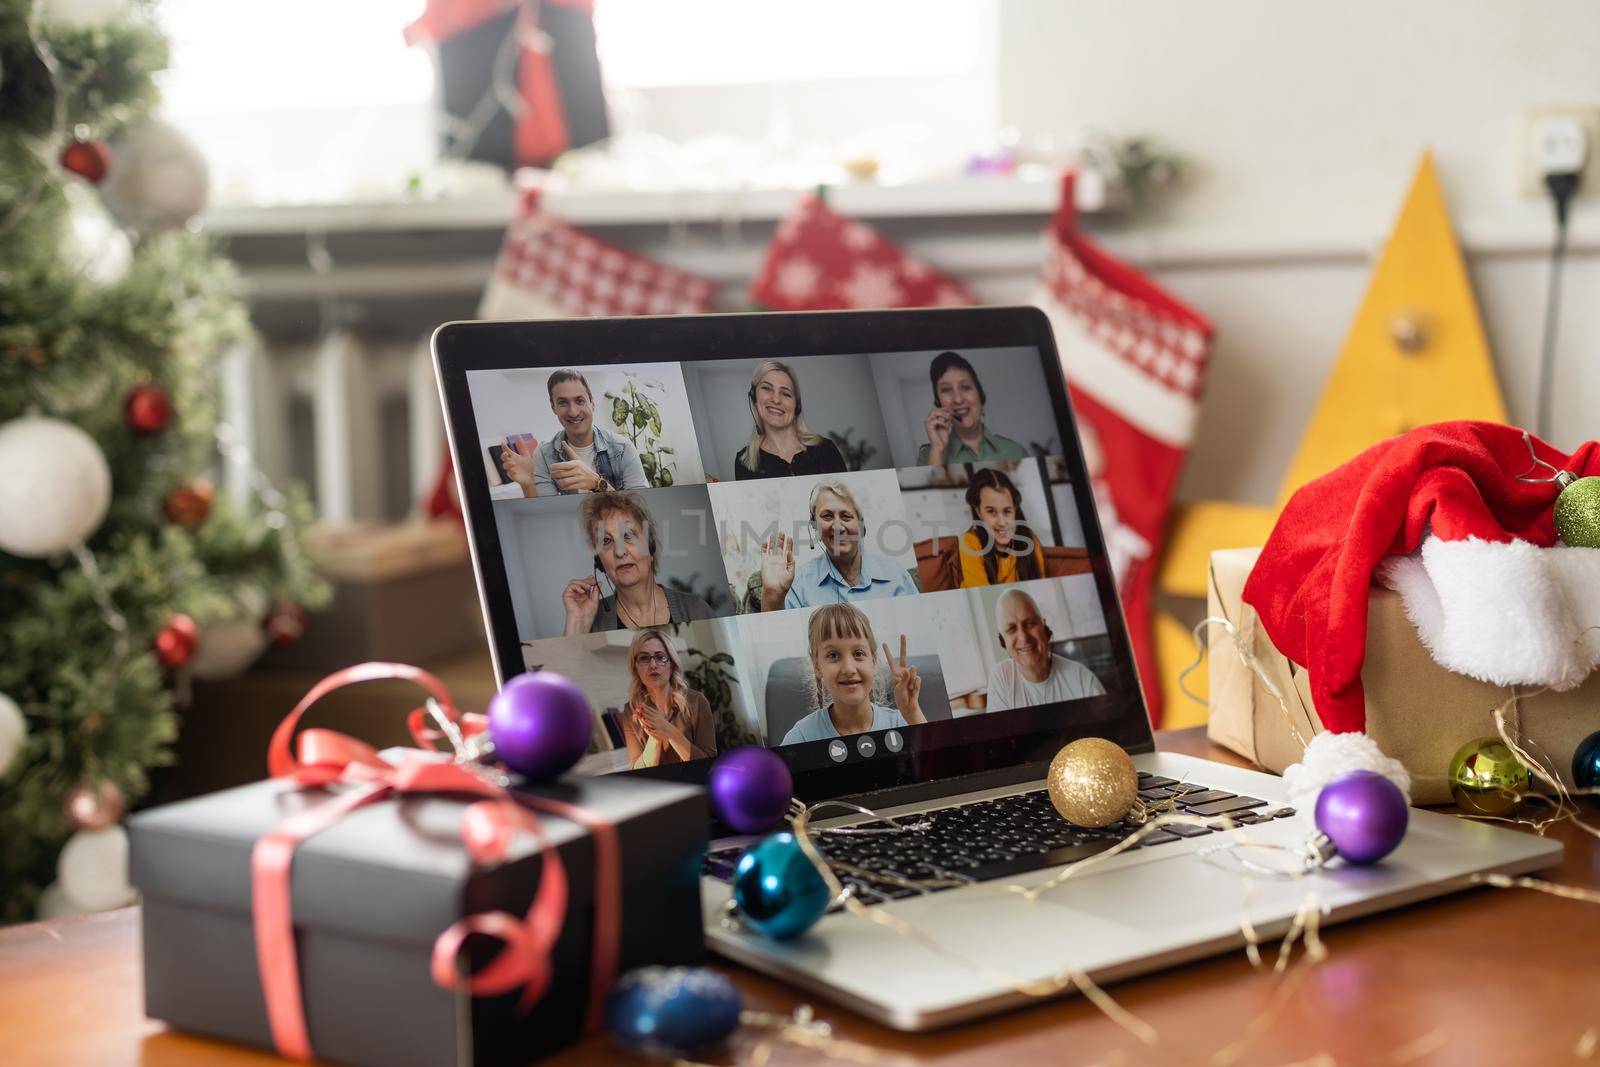 Virtual Christmas tree meeting team teleworking. Family video call remote conference. Laptop webcam screen view. Team meet working from their home offices. Happy hour party online woman team diversity